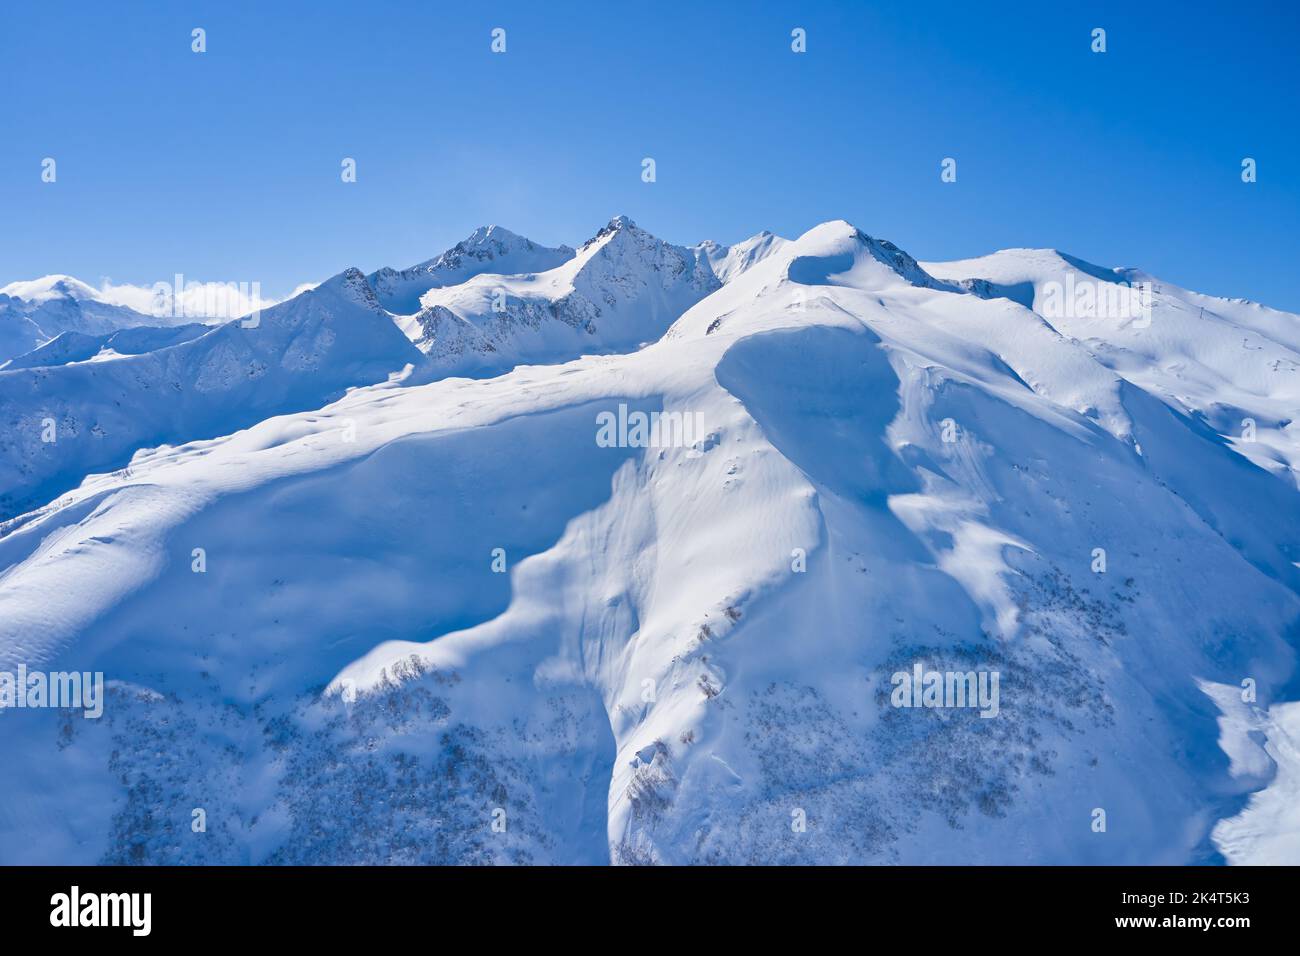 Aerial view of snowy mountains on a sunny day. Stock Photo